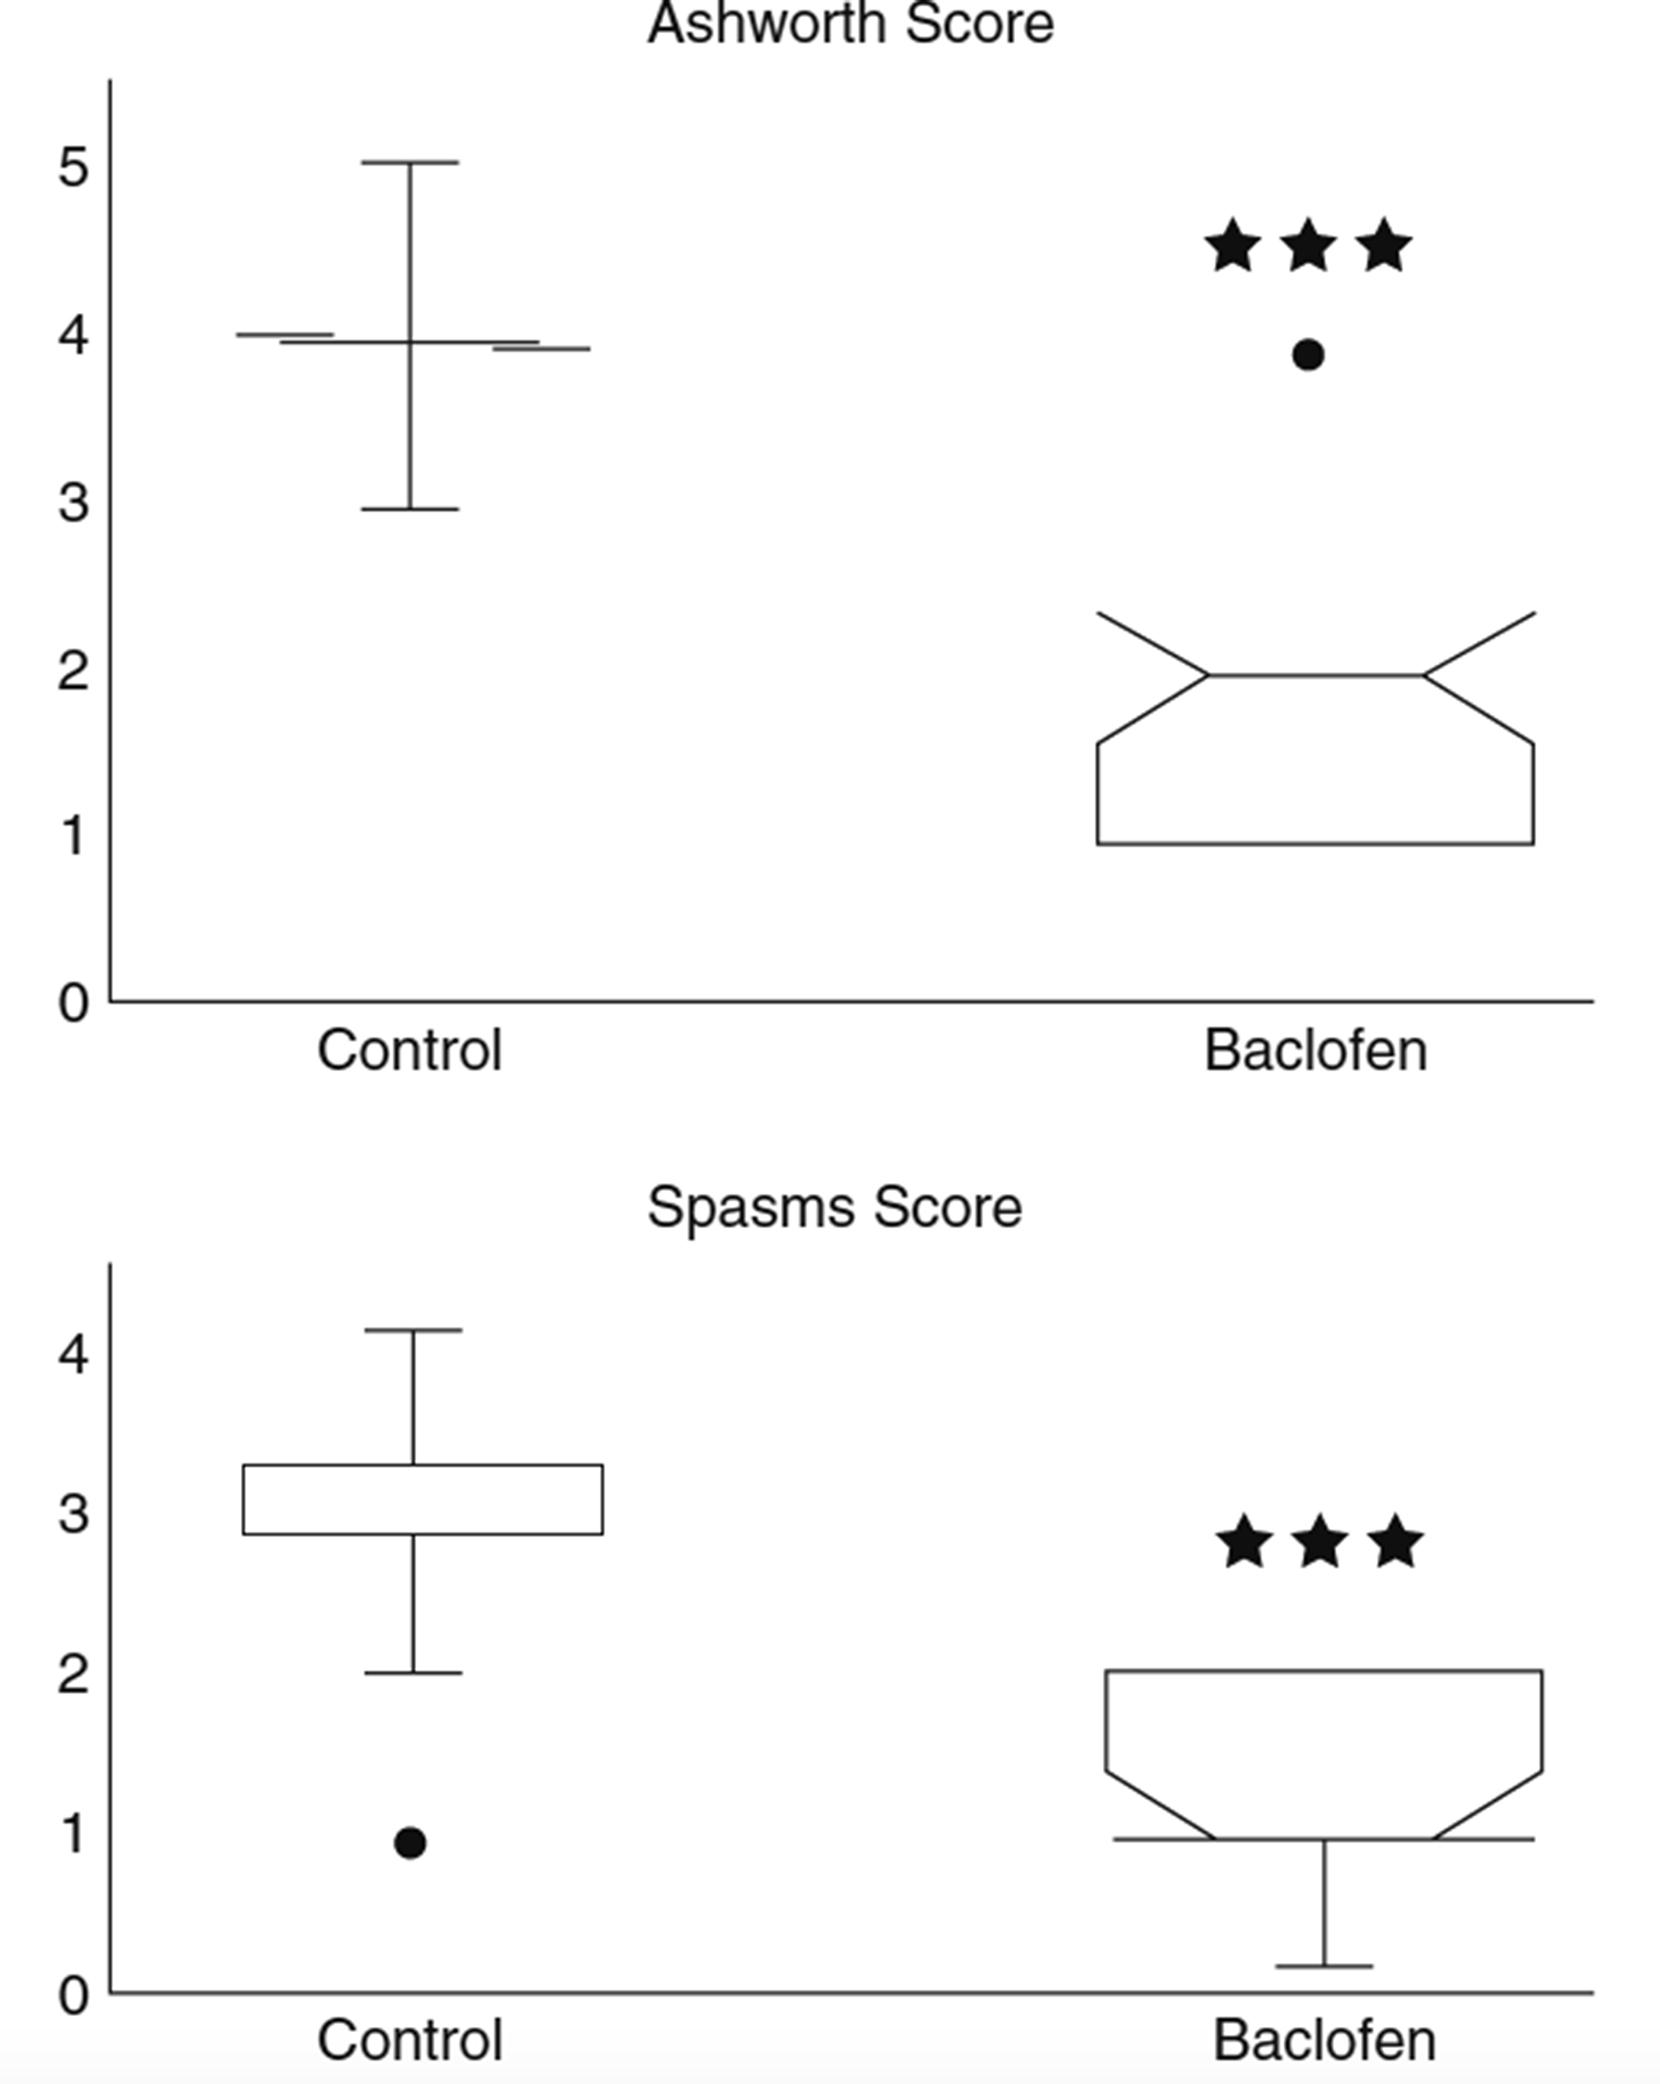 FIGURE 113.3, Clinical scores before (control) and under intrathecal baclofen (Baclofen) therapy in a series of patients affected with spastic paraplegia. 8 Wilcoxon signed-rank test showed a significant reduction in both hypertonia of lower limbs (Ashworth score) and frequency of spasms (∗∗∗, P < .001). The lower and upper borders of the box represent the 25% and 75% quartiles of the distribution, while the line inside the box corresponds to the median value. The upper and lower whiskers stand for the 10th and 90th percentiles. The dots outside the whisker range are the observed values exceeding those percentiles.